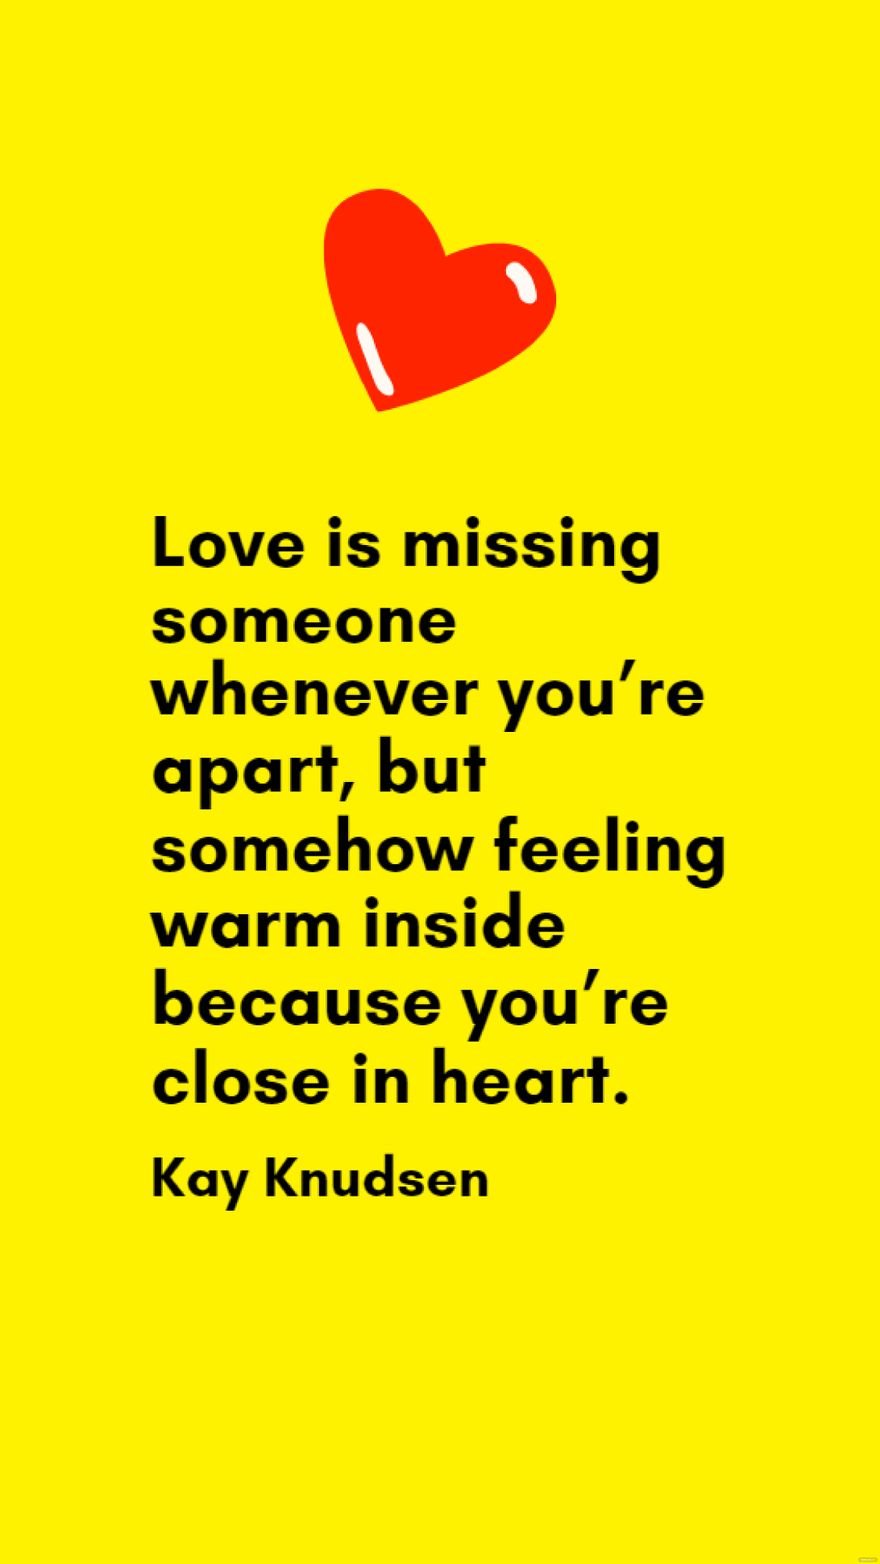 Kay Knudsen - Love is missing someone whenever you’re apart, but somehow feeling warm inside because you’re close in heart.